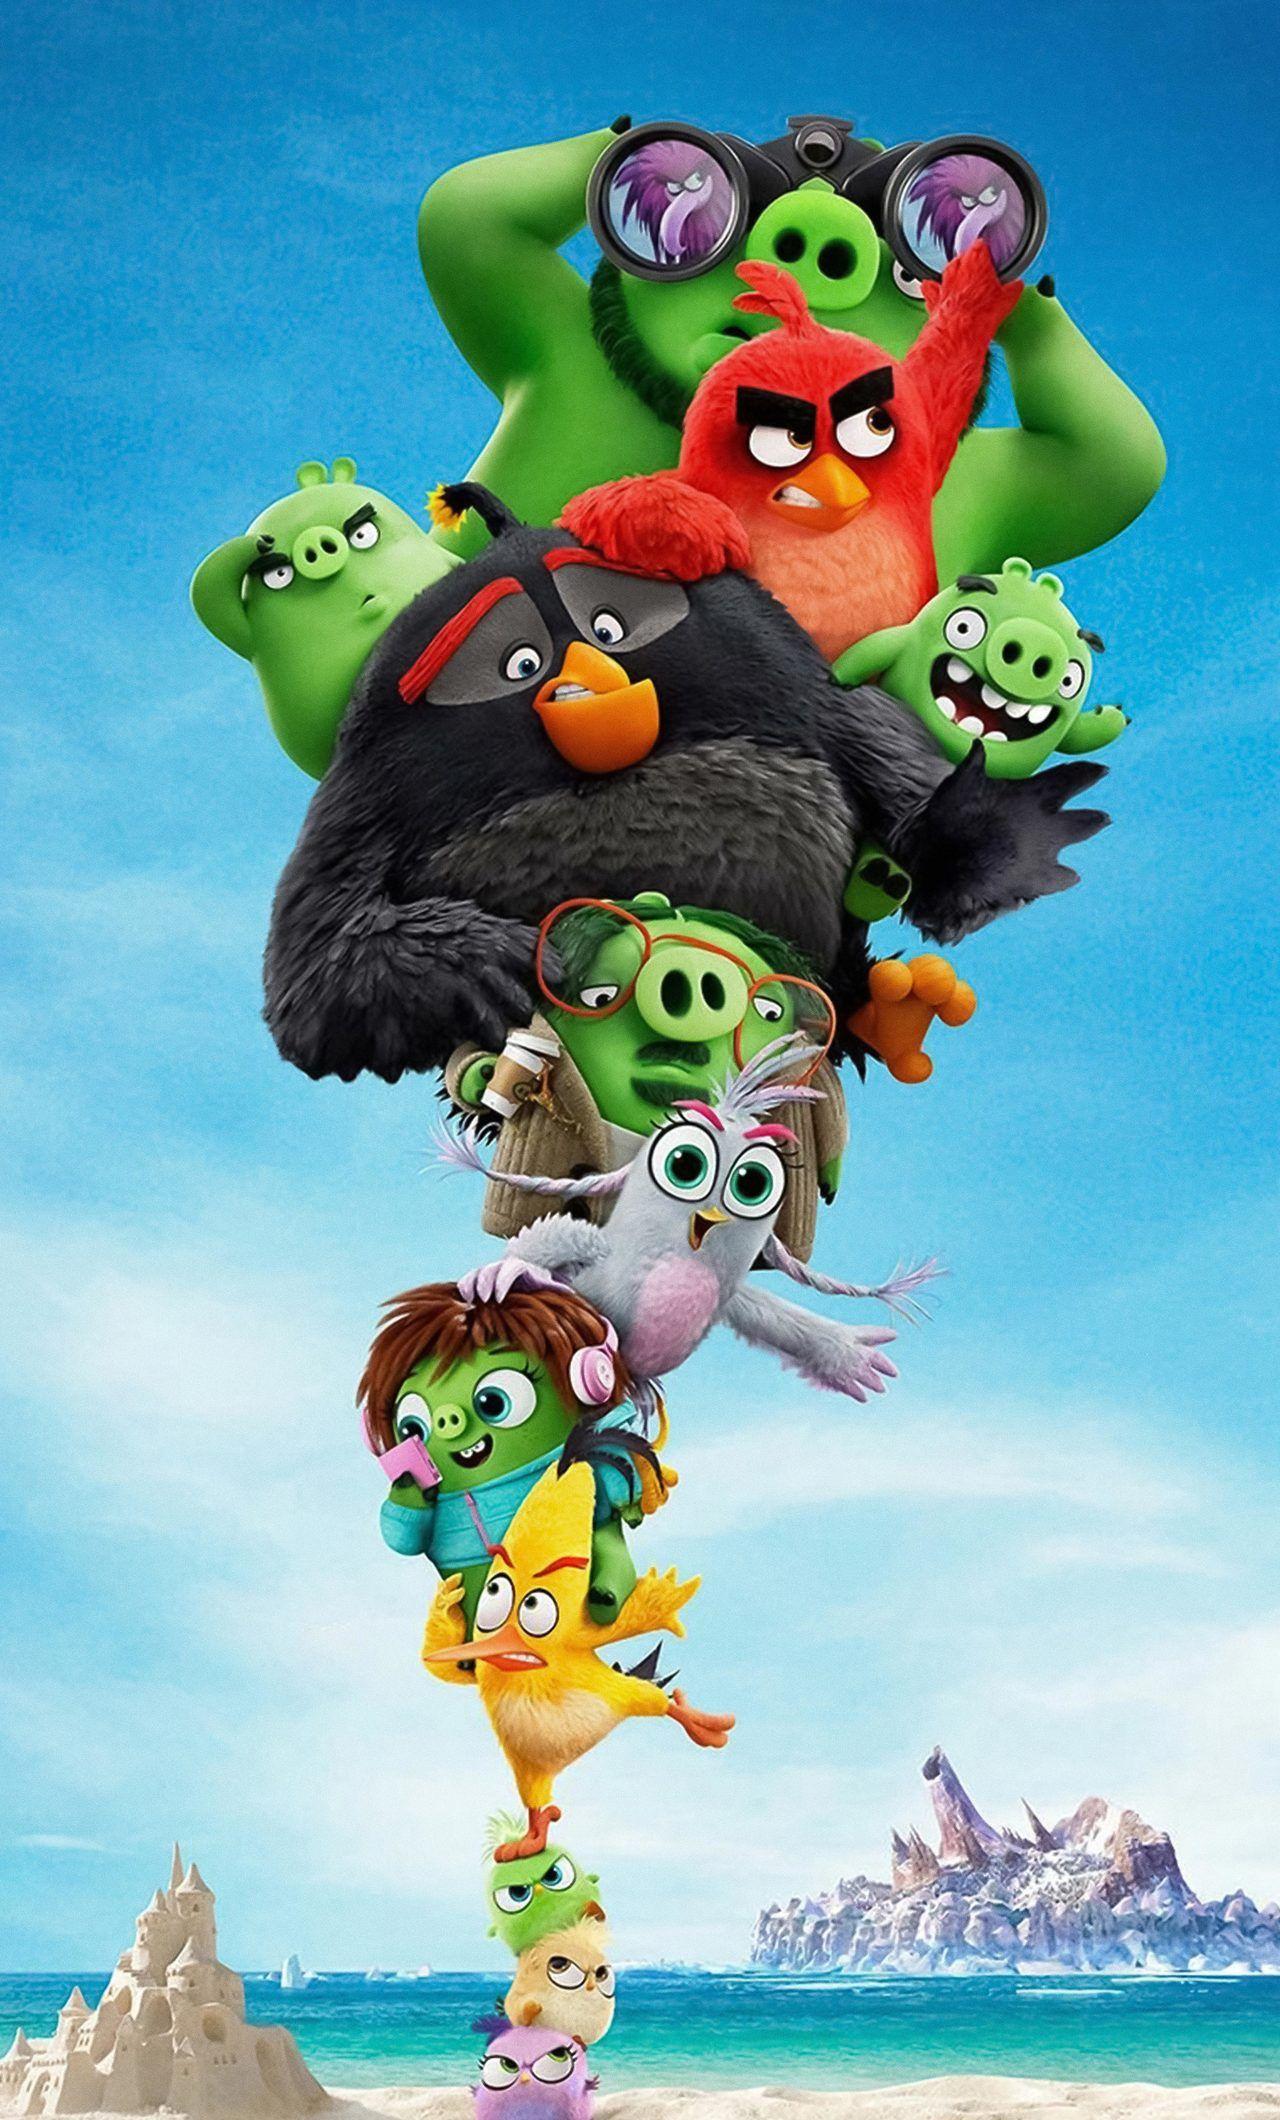 The Angry Birds Movie 2 Wallpaper Free The Angry Birds